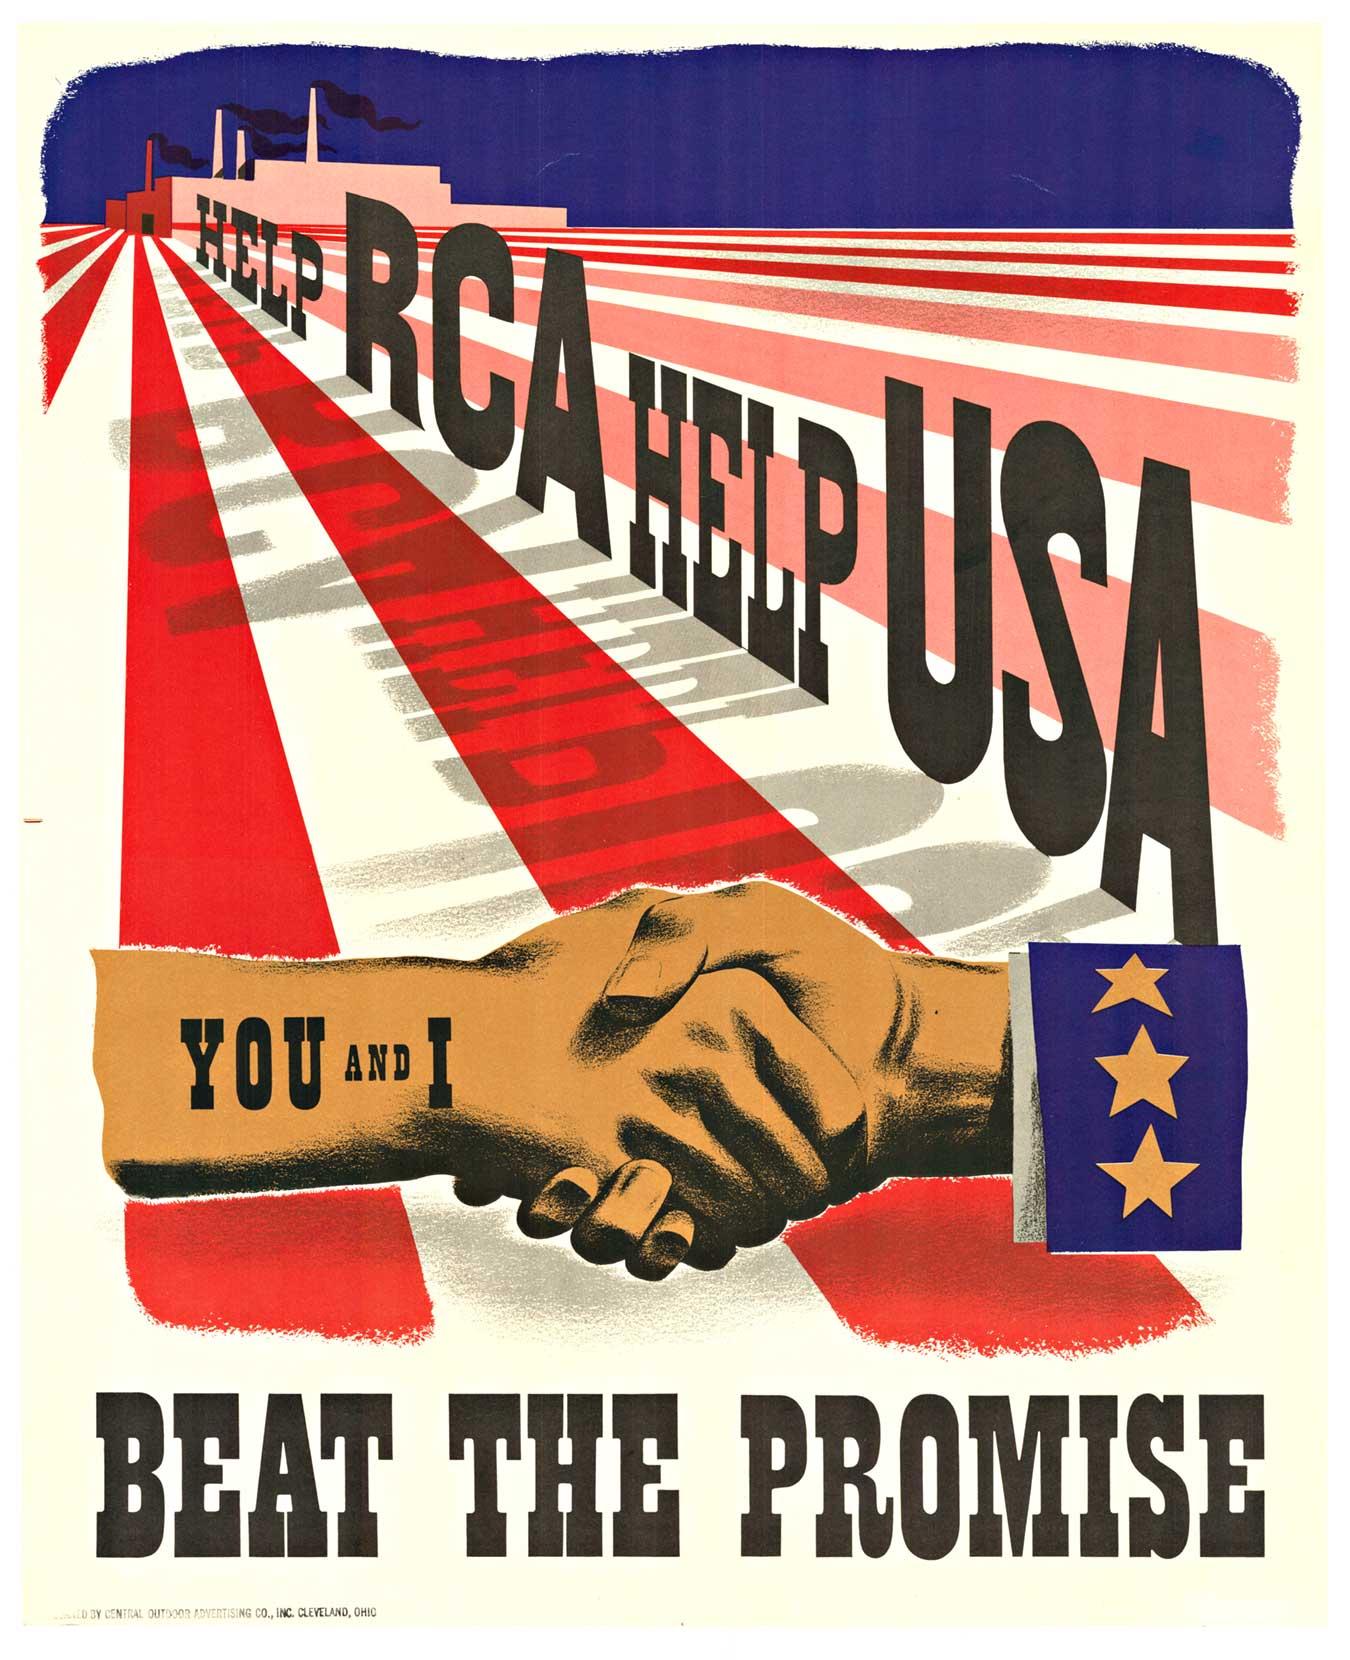 Unknown Landscape Print - Original 'Help RCA help USA, You and I Beat the Promise" vintage WWII poster